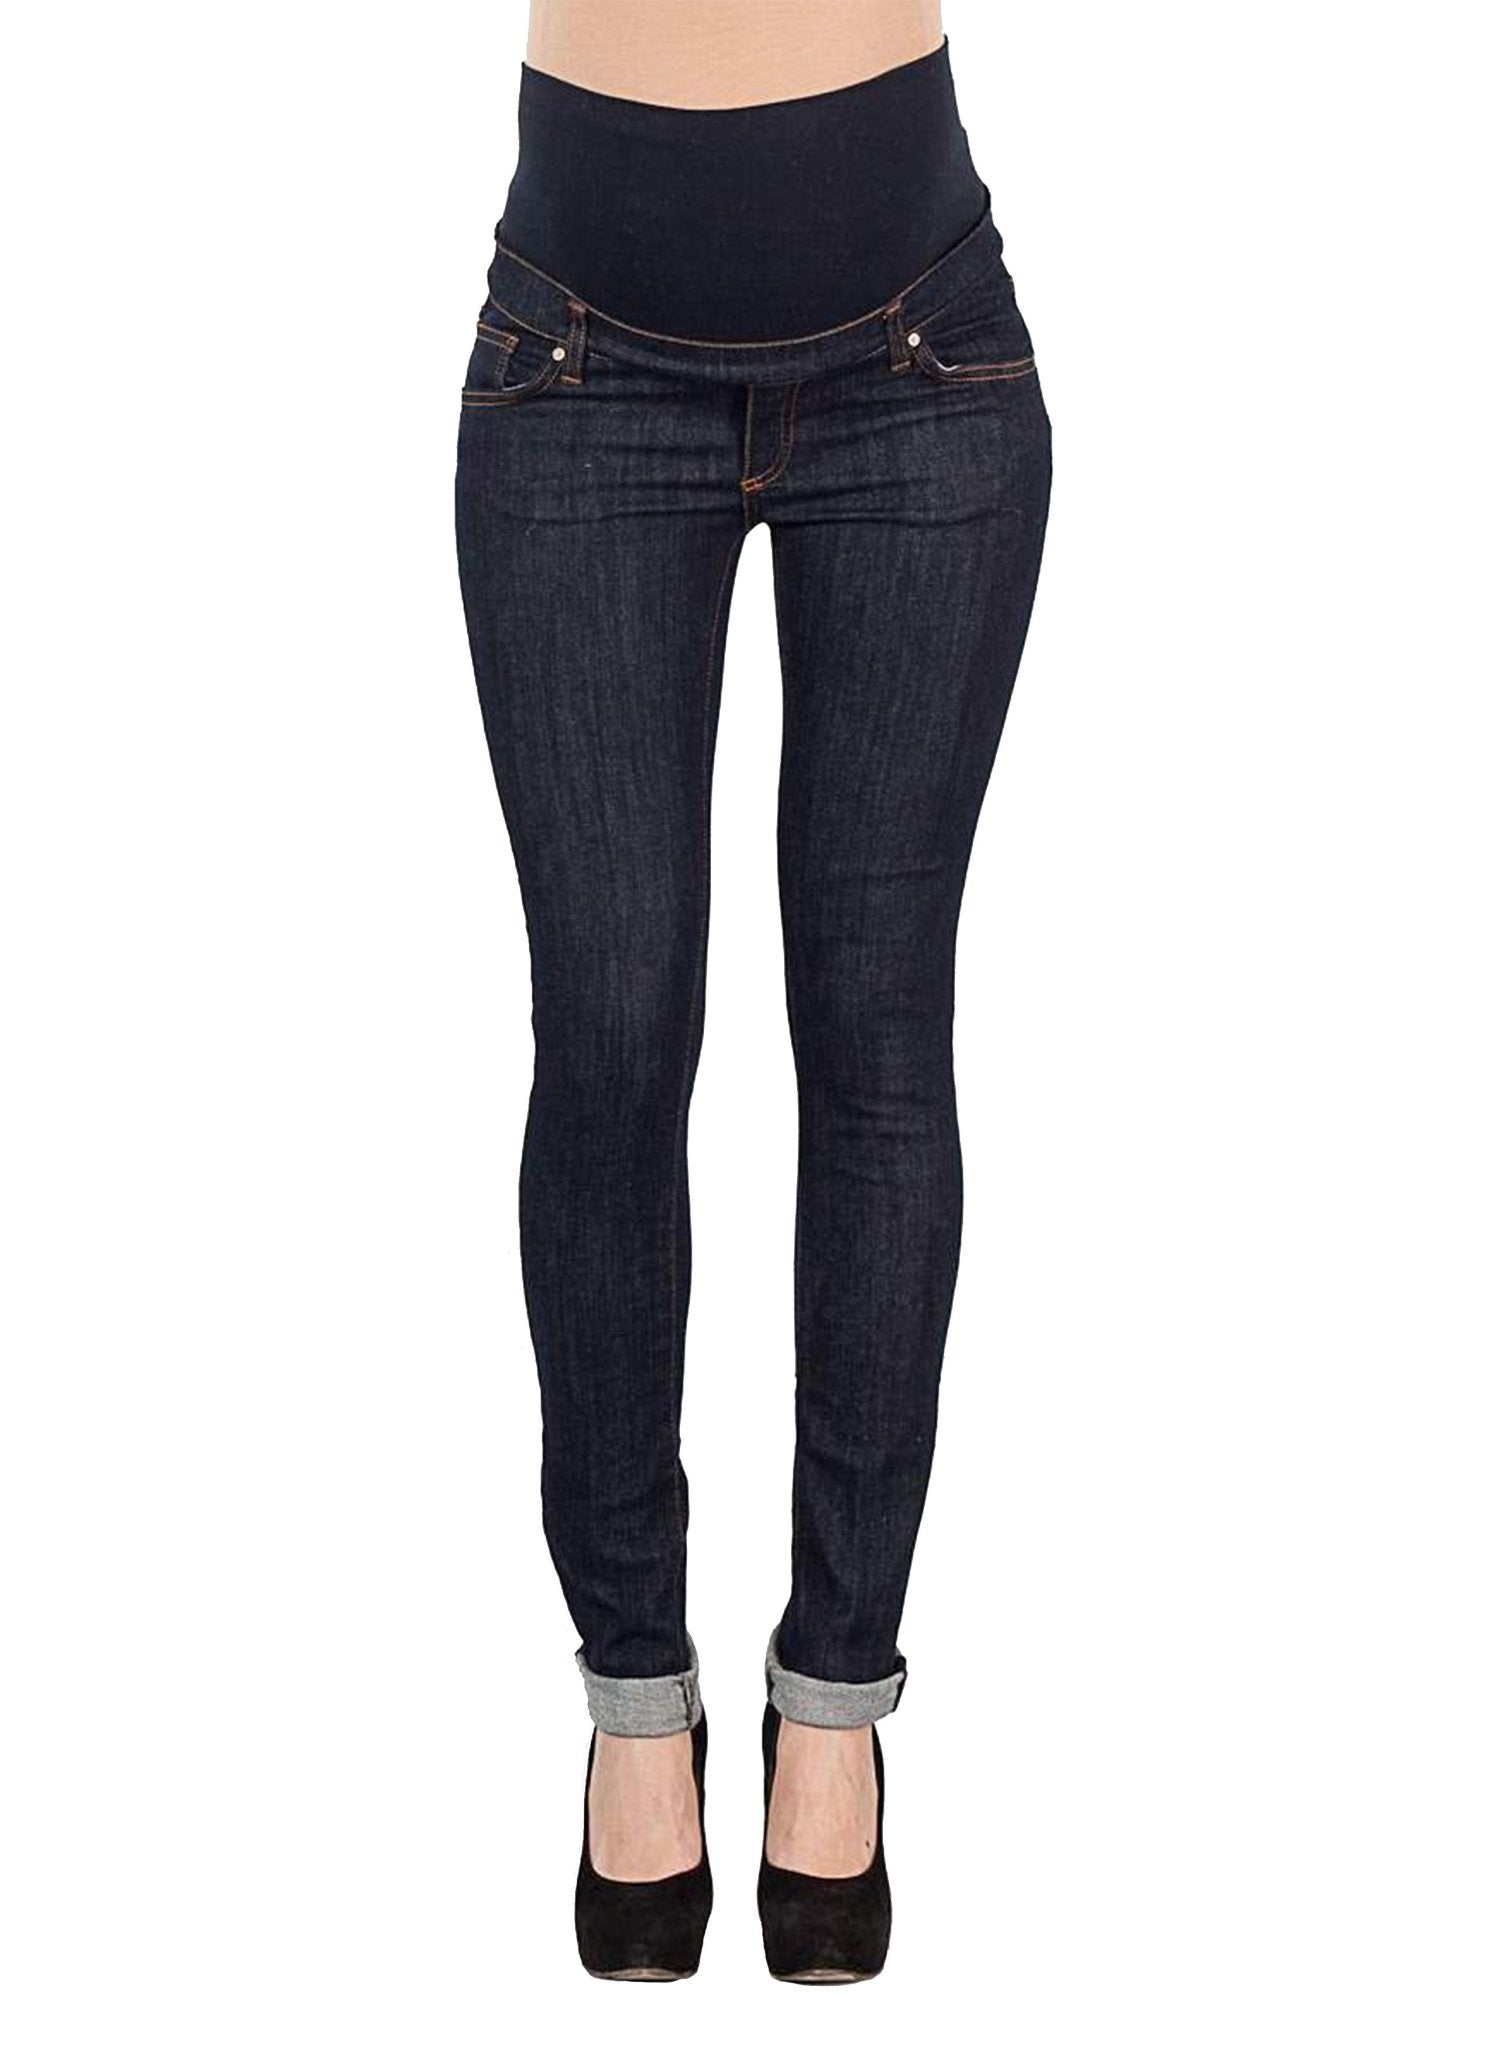 Premaman Skinny Fit Maternity Jeans - Mums and Bumps